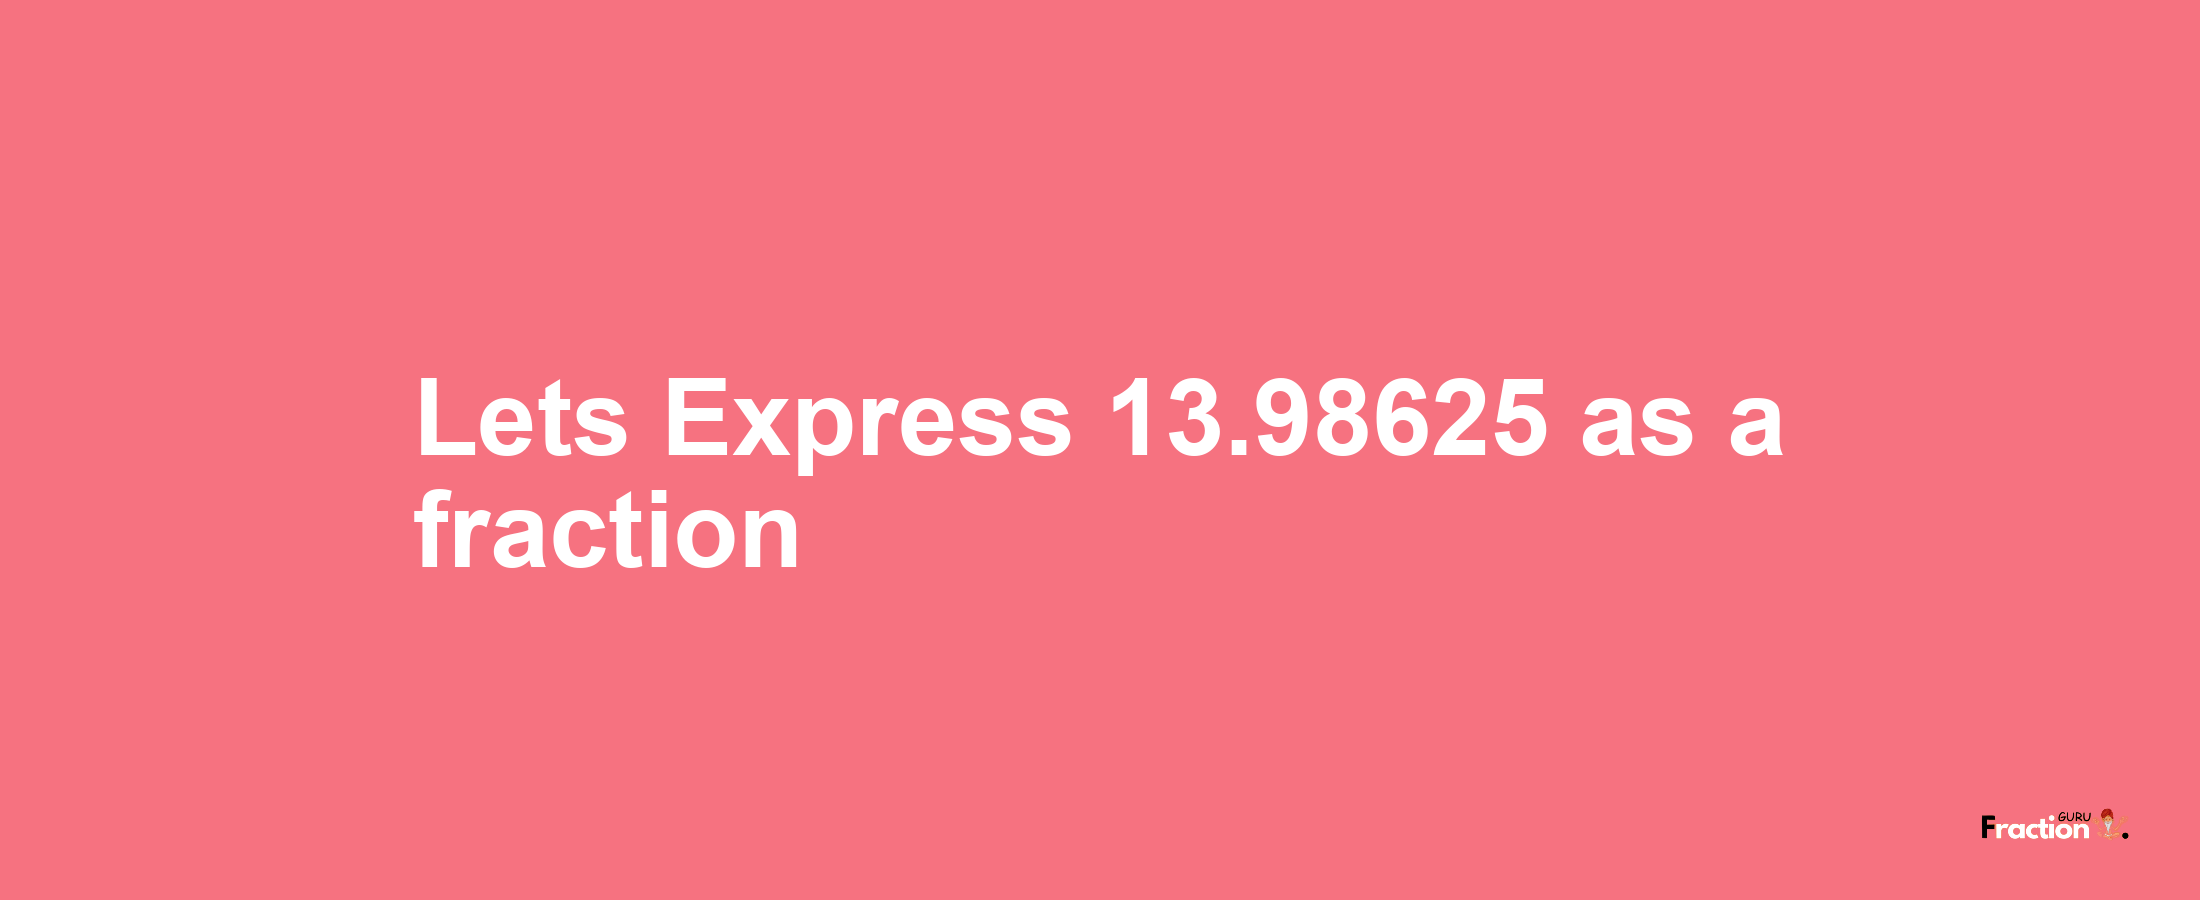 Lets Express 13.98625 as afraction